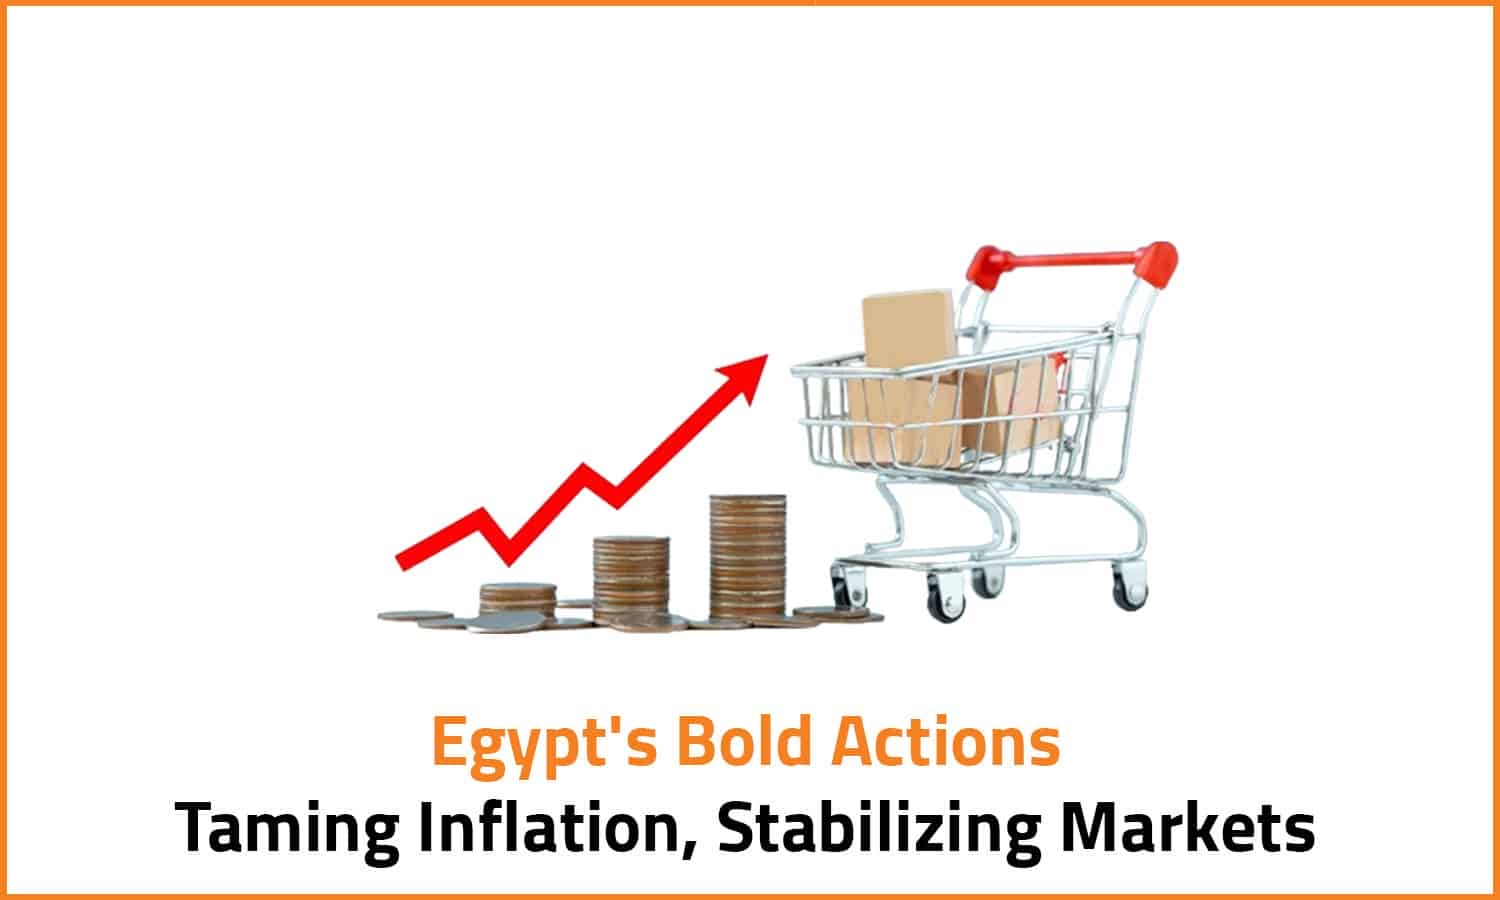 Egypt's Bold Actions: Taming Inflation, Stabilizing Markets